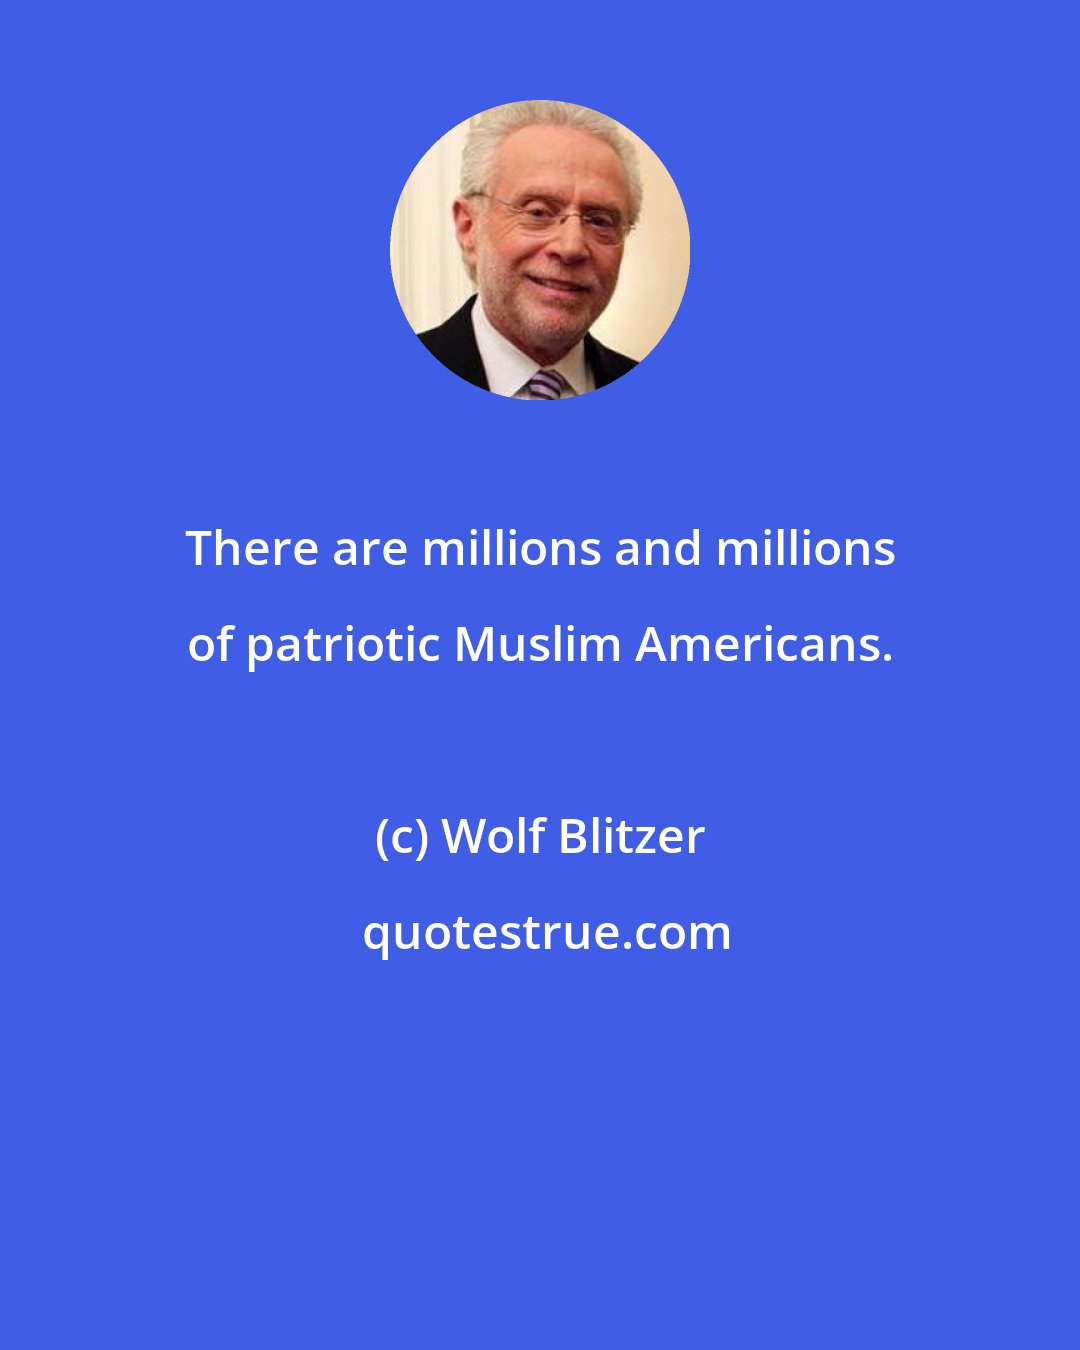 Wolf Blitzer: There are millions and millions of patriotic Muslim Americans.